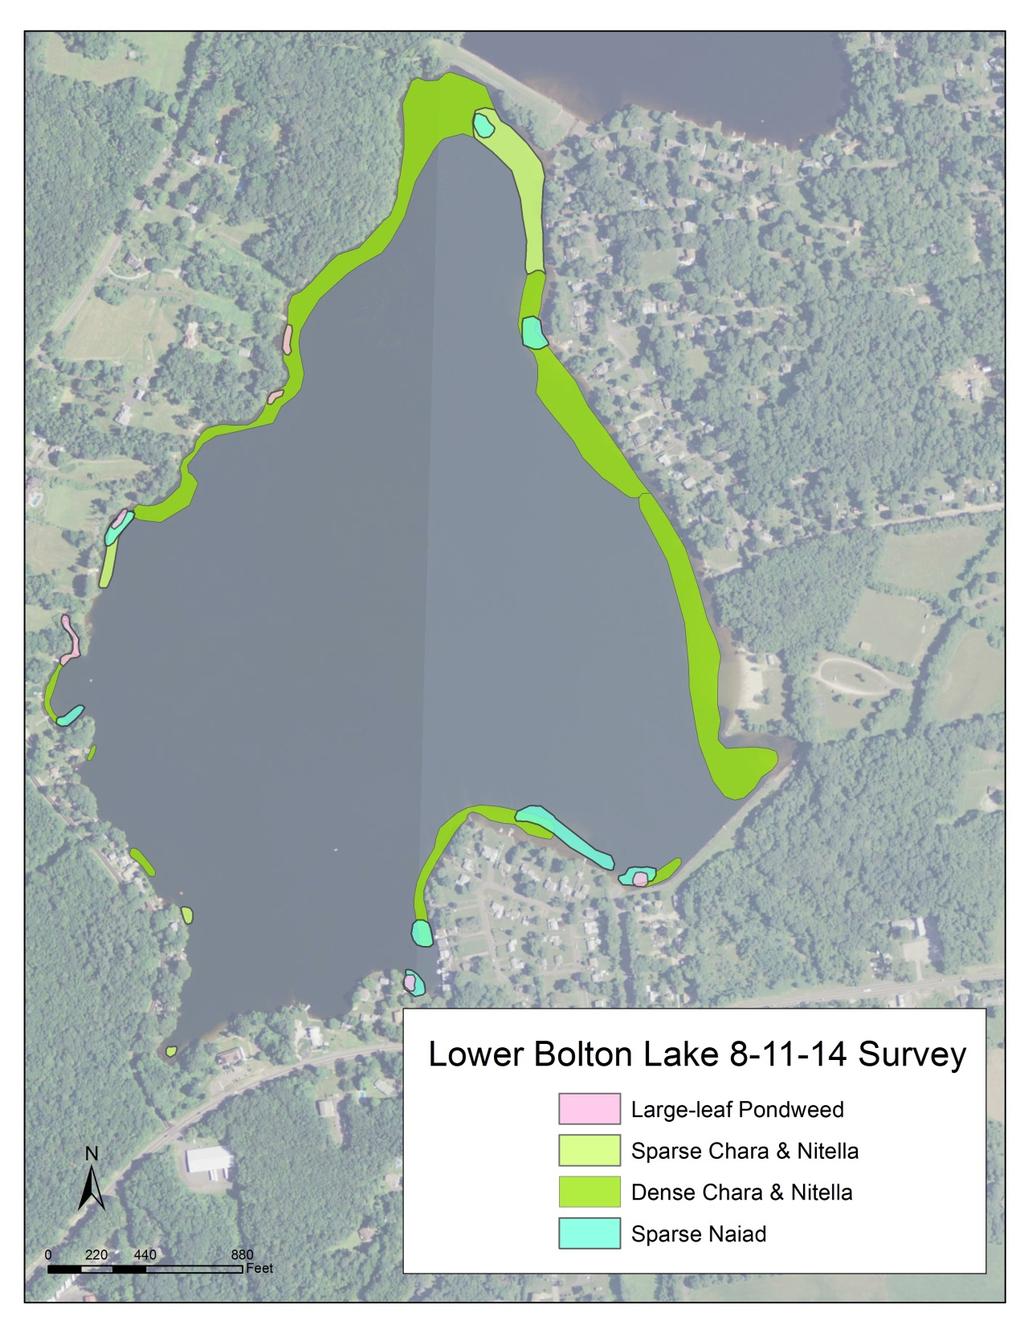 Aquatic plant 214 survey results Very little southern naiad in the lake note blue areas on the map.